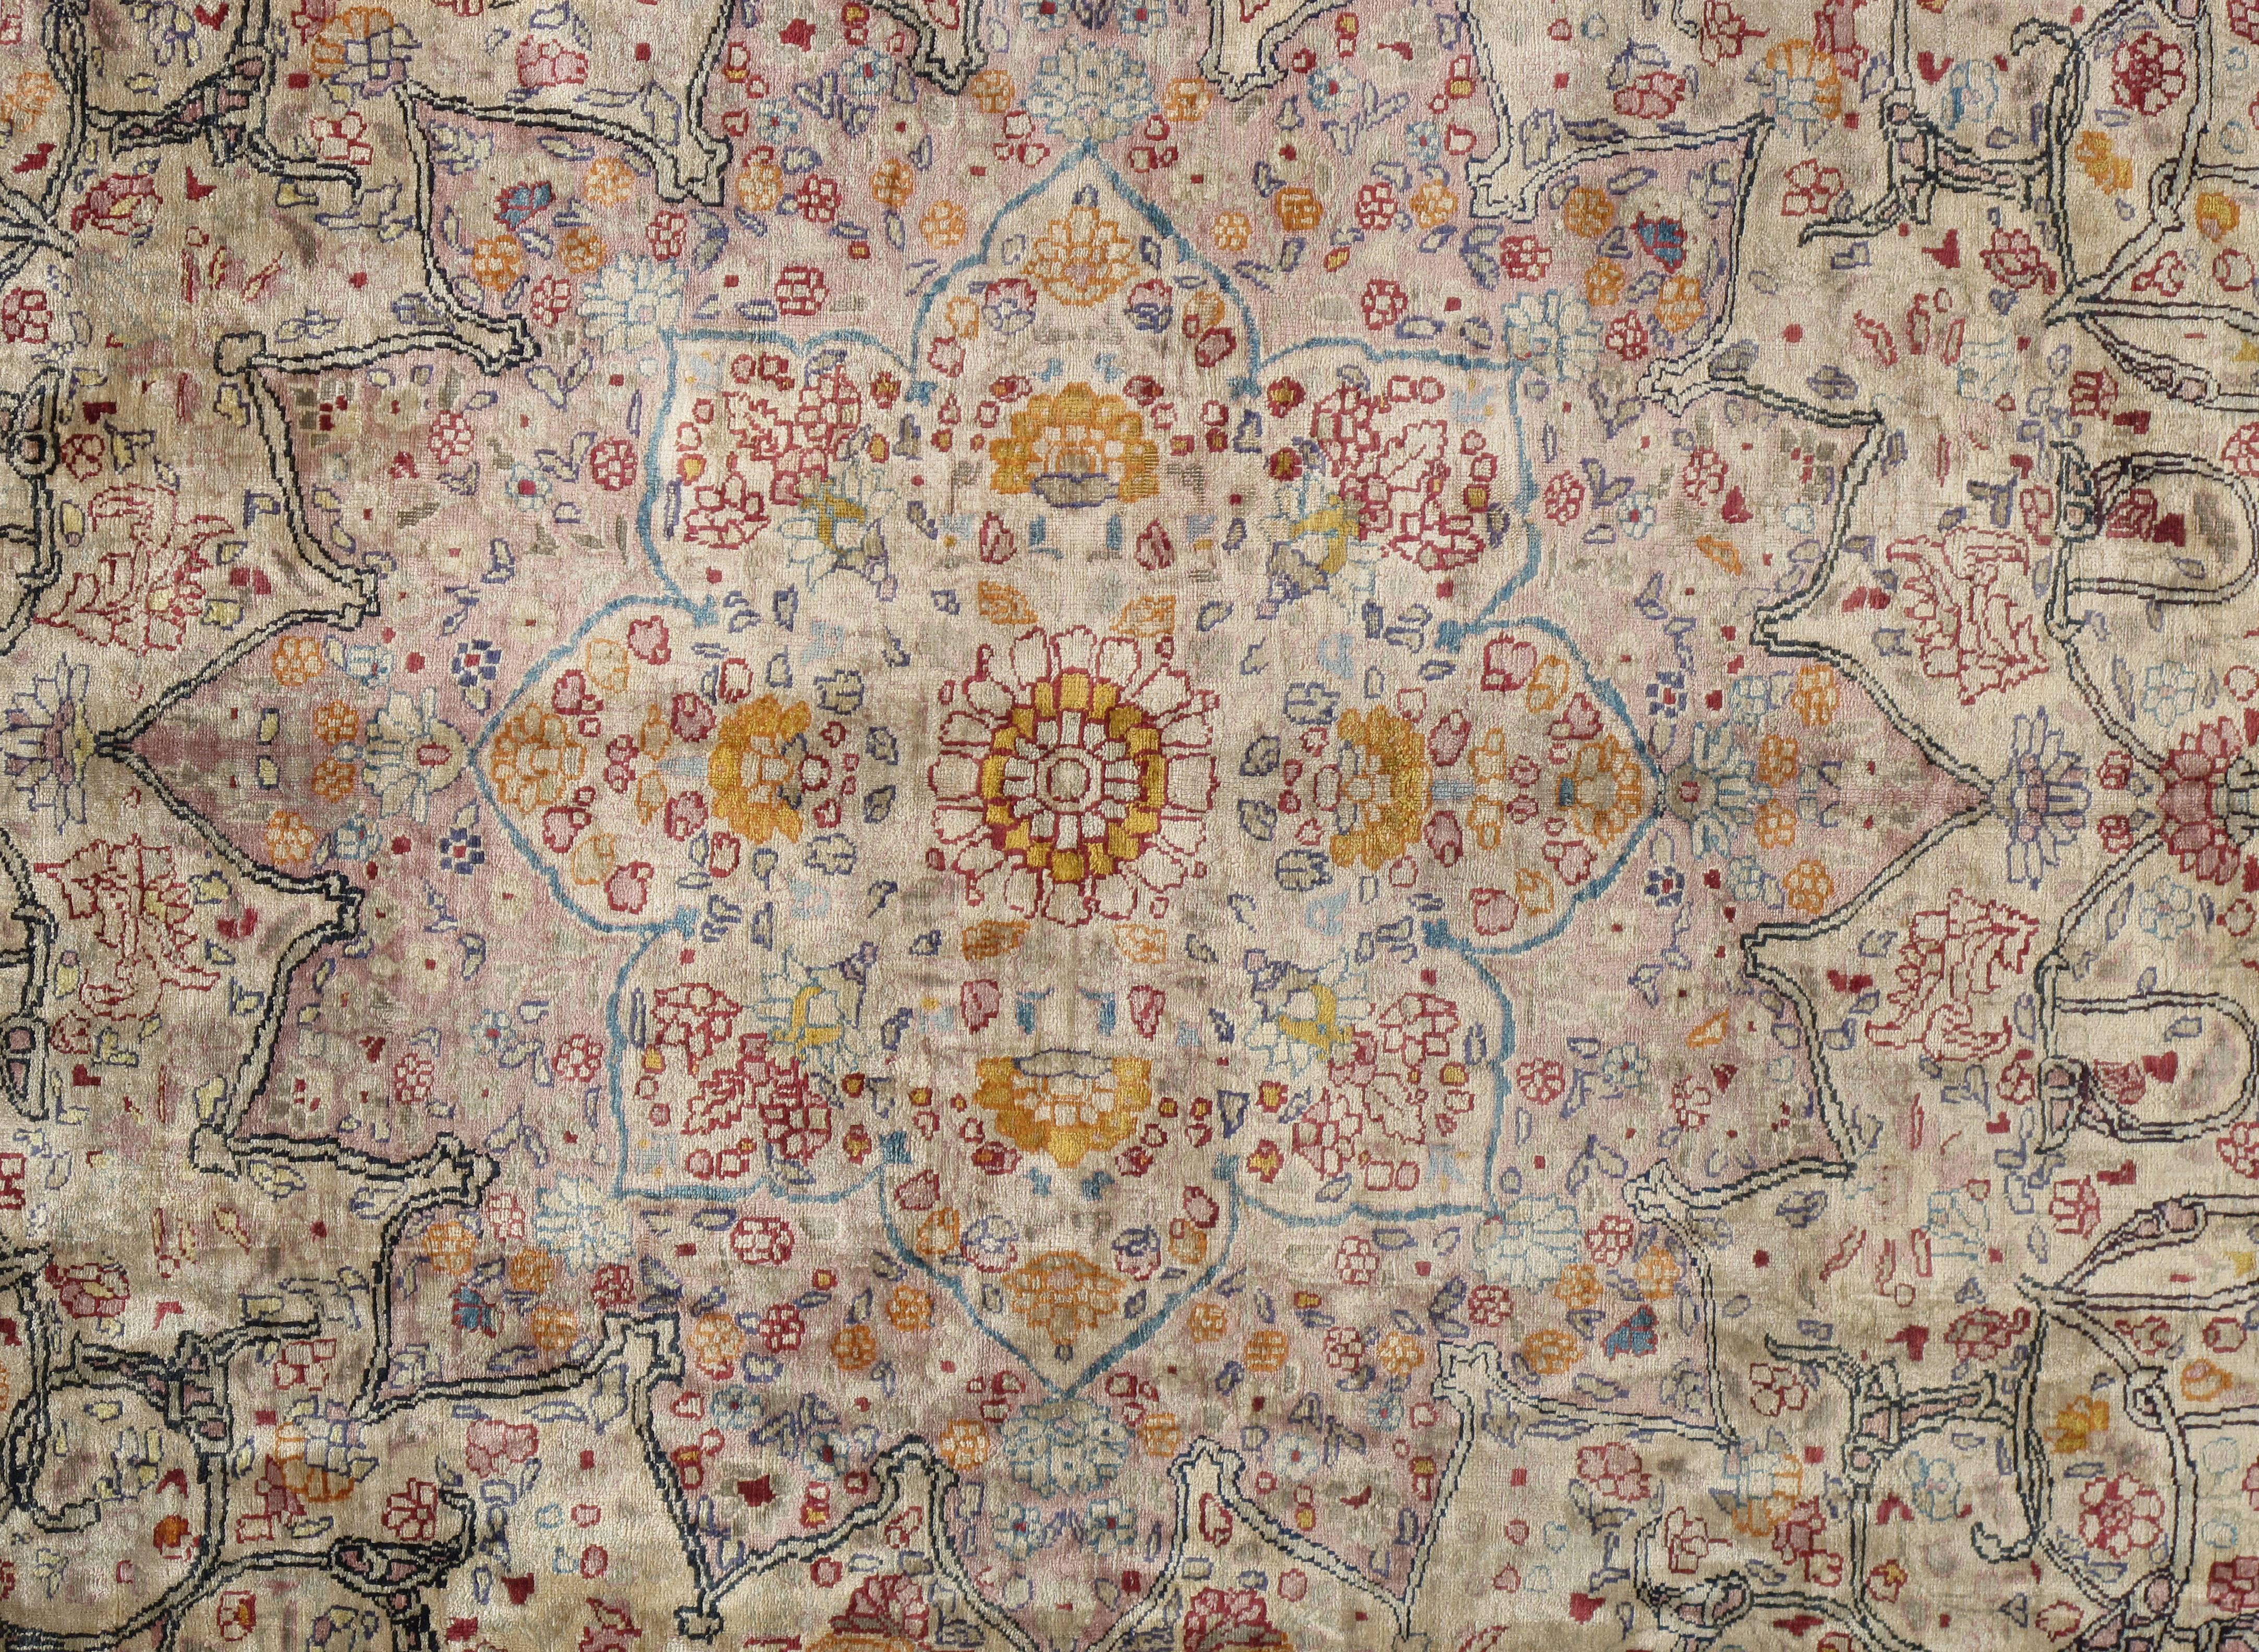 Finely woven silk Tabriz carpet. Tabriz, the capital of the northwestern Iranian province of Azerbaijan, has for centuries enjoyed a great reputation as a center of Persian culture. Under the benign patronage of Shah Abbas the Great (1587-1629),